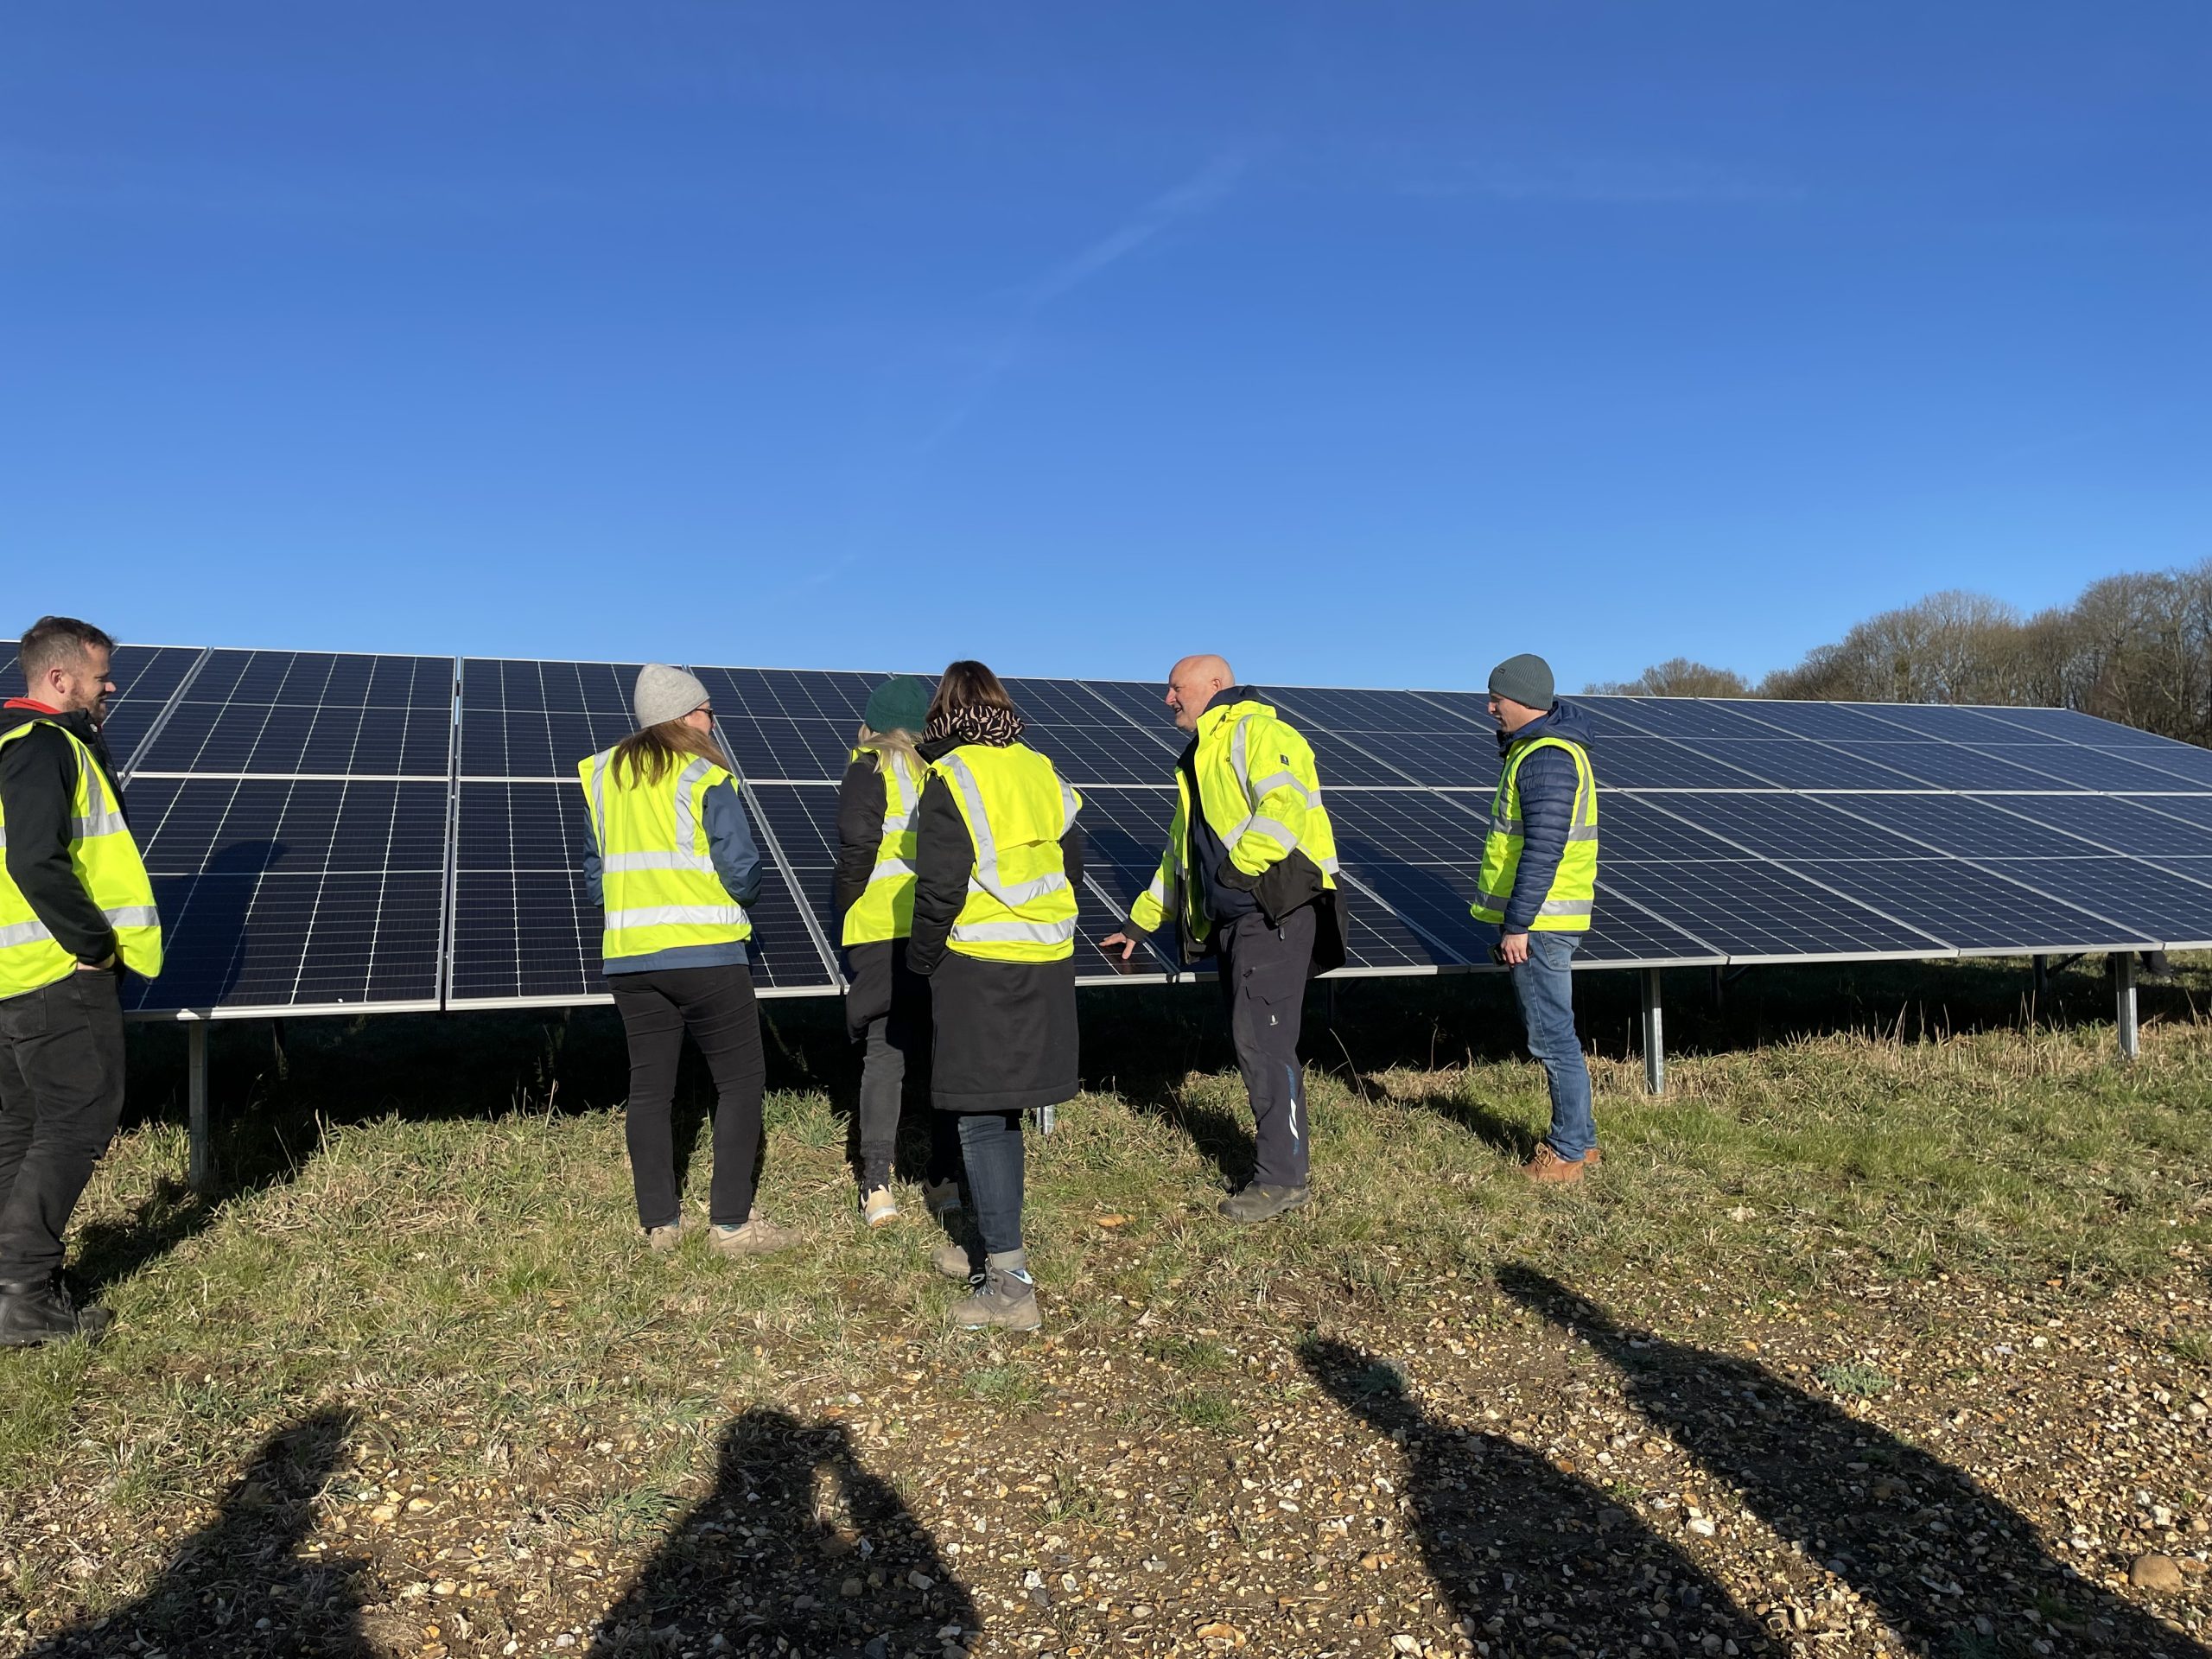 The One Earth project team enjoys a site visit to one of our working solar farms